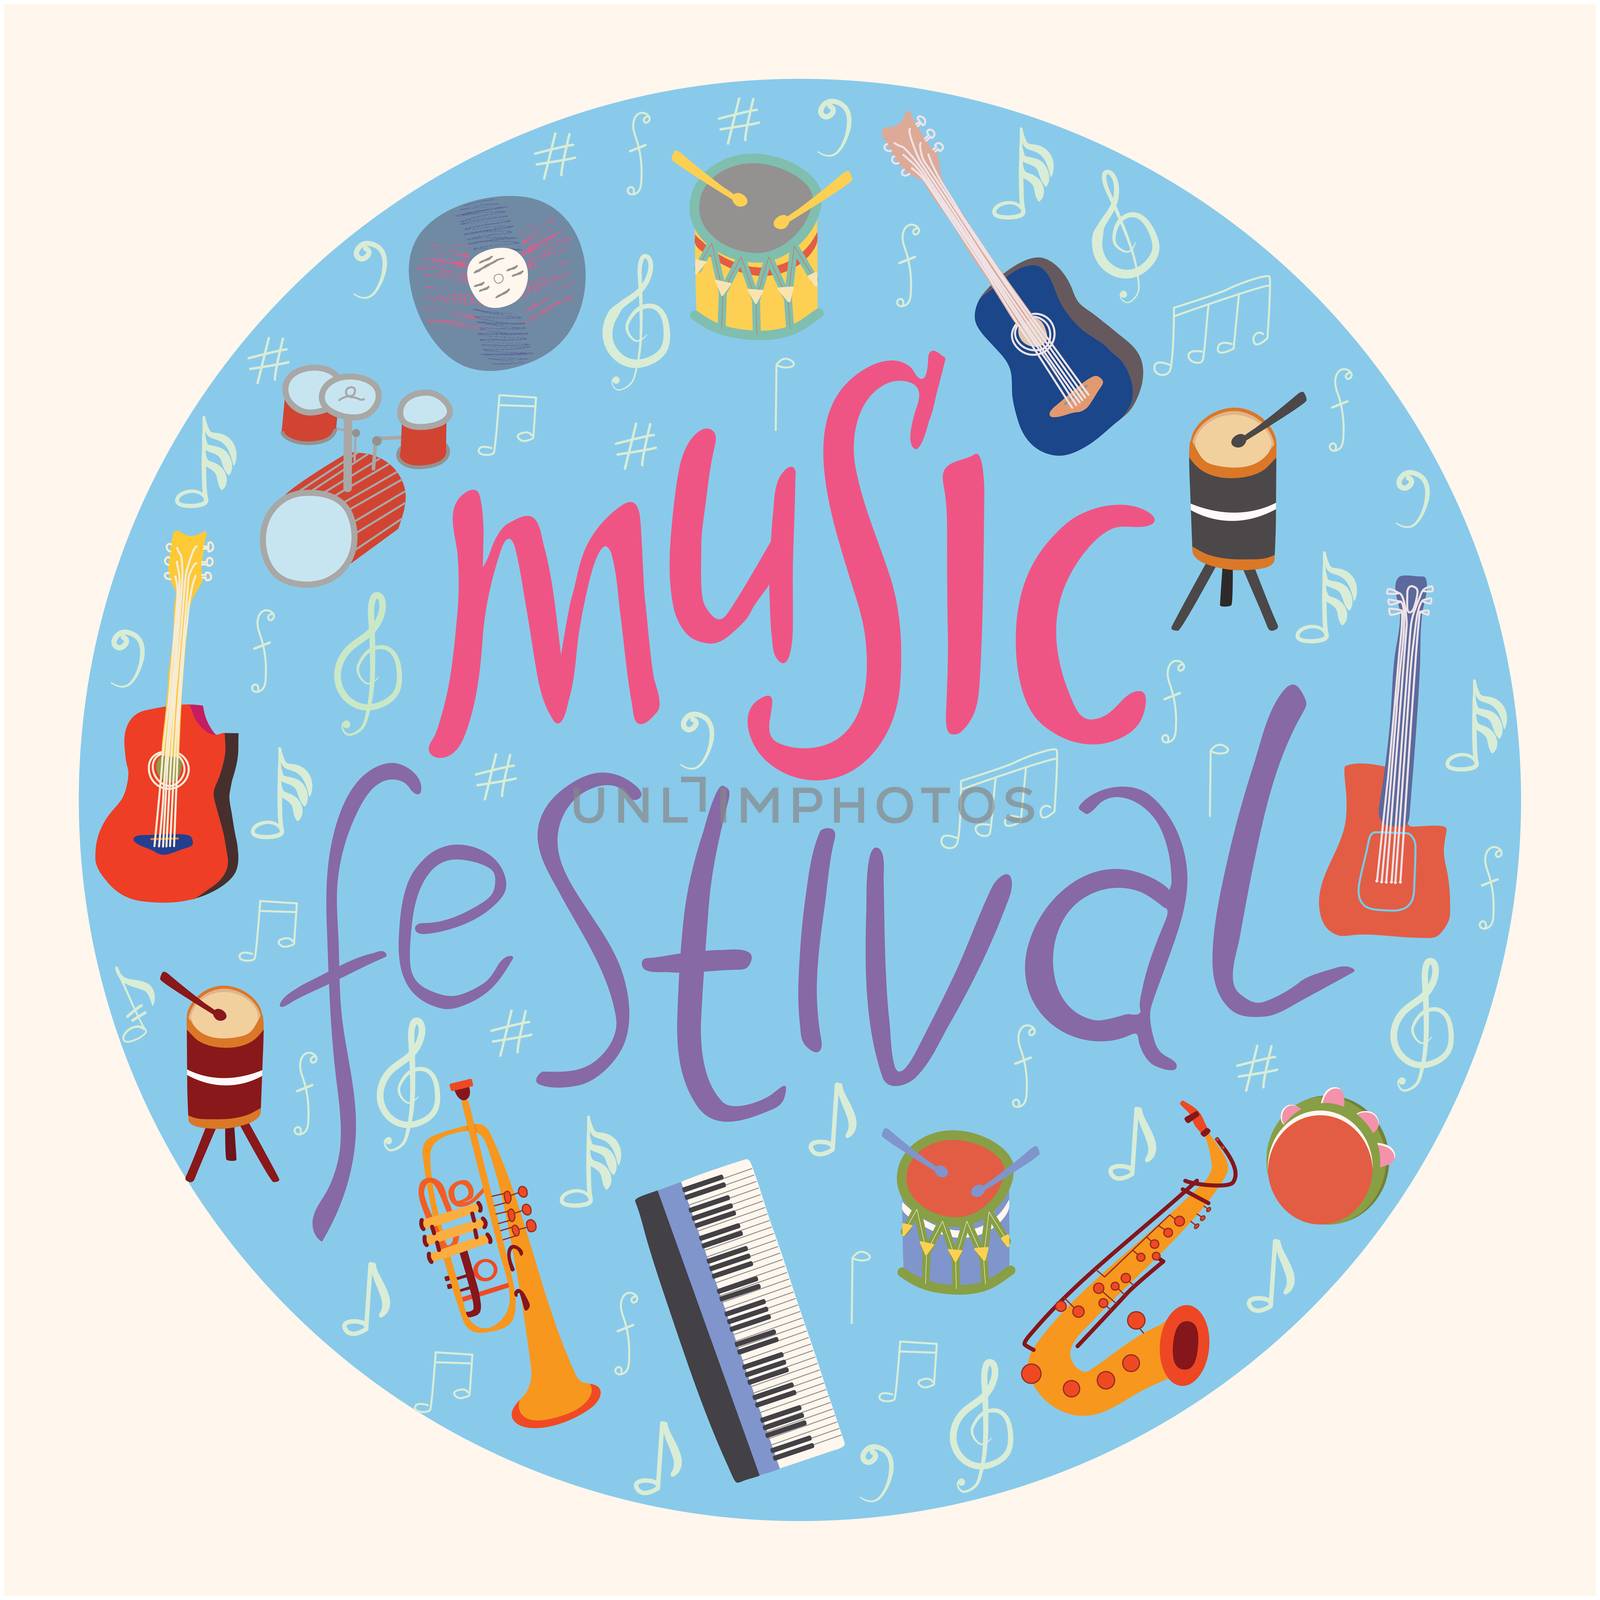 Round shape with musical instruments and lettering music festival. Music festival poster template. Rock, jazz concert, vector design brochures, flyers or cards. Musical instruments and lettering sketch round composition.